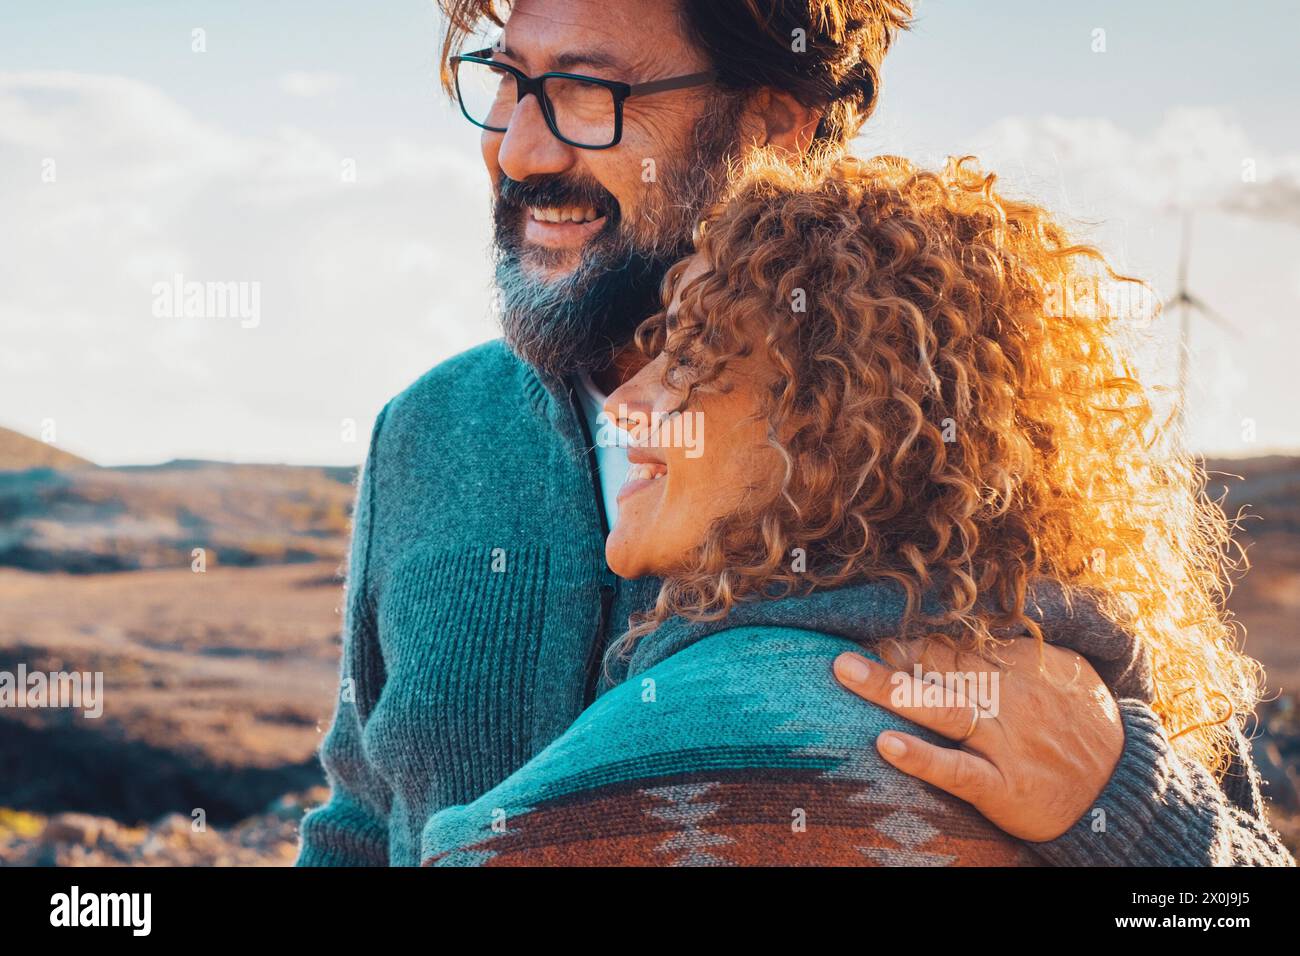 Happy traveler adult couple enjoy outdoor leisure activity in desert coastline beach destination together with love and adventure lifestyle. Man hugging woman happy people in relationship outside Stock Photo